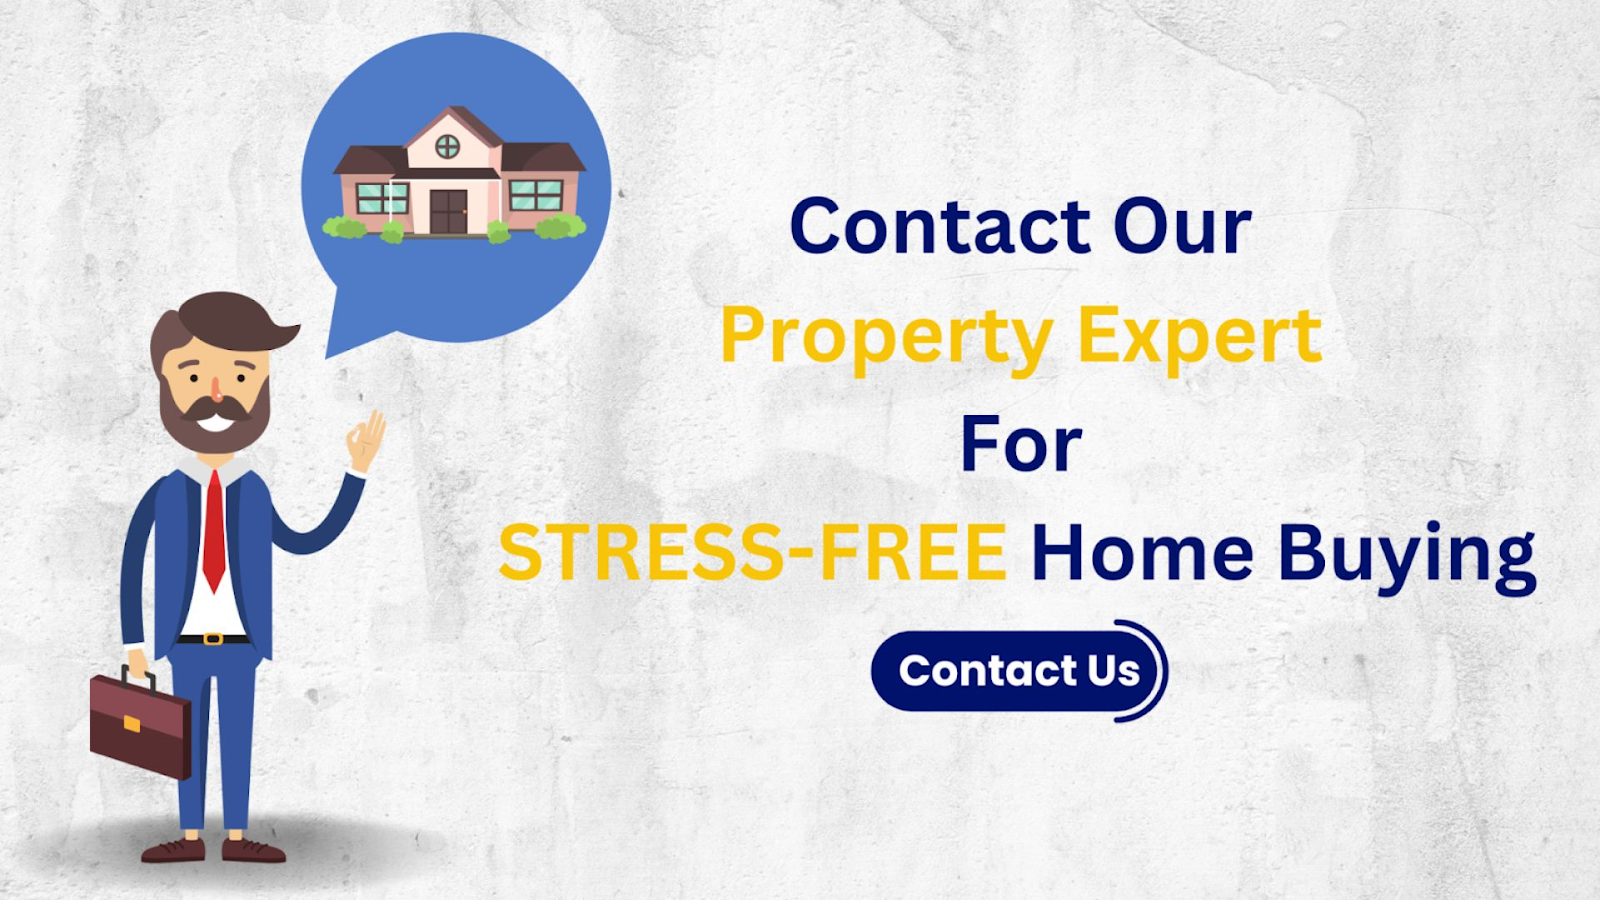 Contact a real estate specialist at PropertyCloud for a stress-free home purchase.